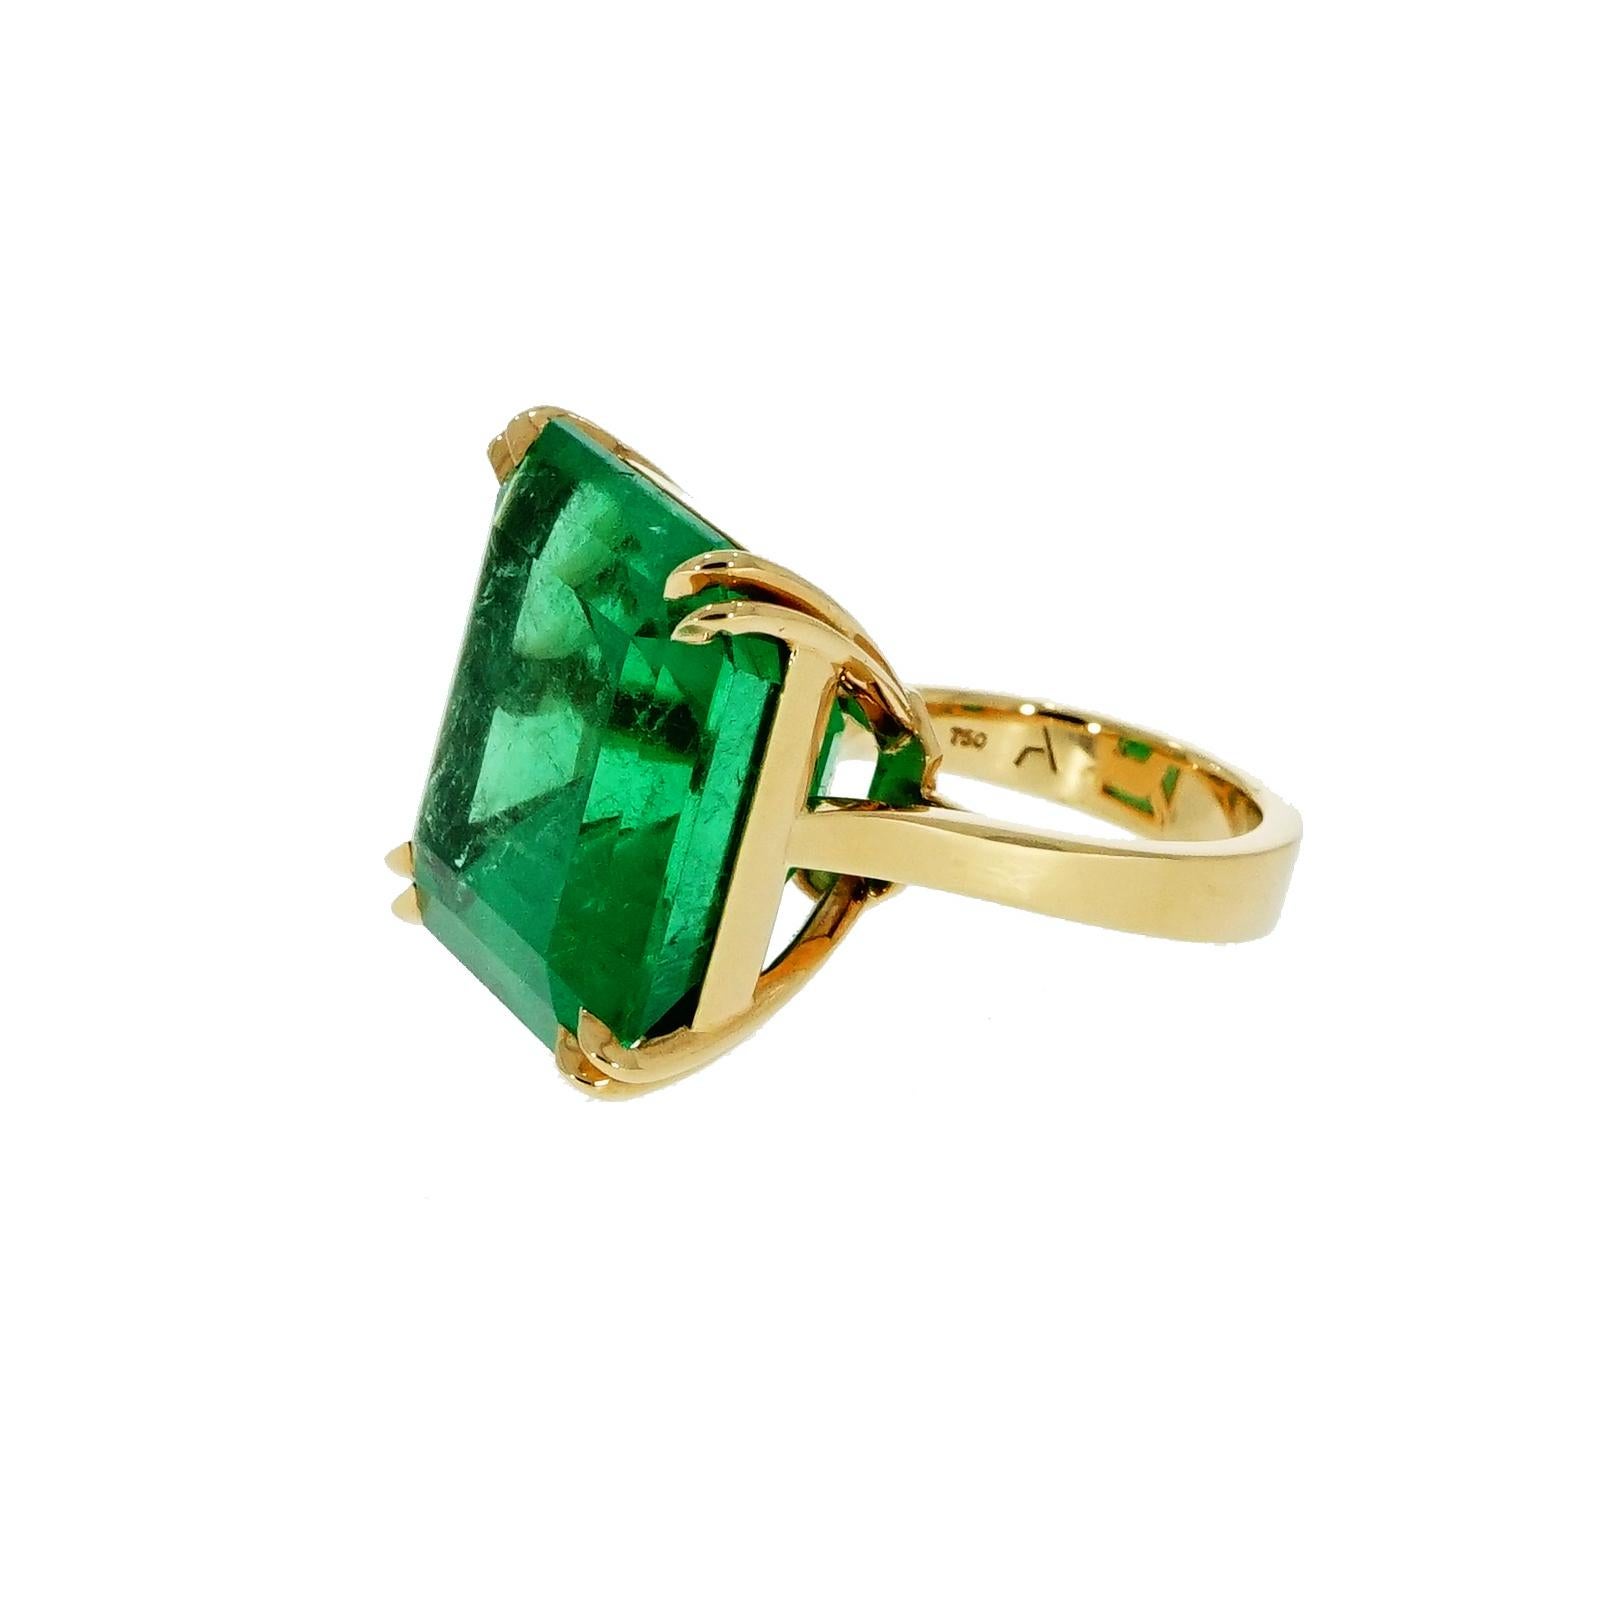 Absolutely gorgeous!!! Squared emerald cut Colombian Emerald Yellow Gold Ring with a nice deep green color in a handcrafted 18k Yellow Gold mounting to fit a 5.75 finger size (can be sized accordingly) 
The emerald weigh is 40.14 carats and measures